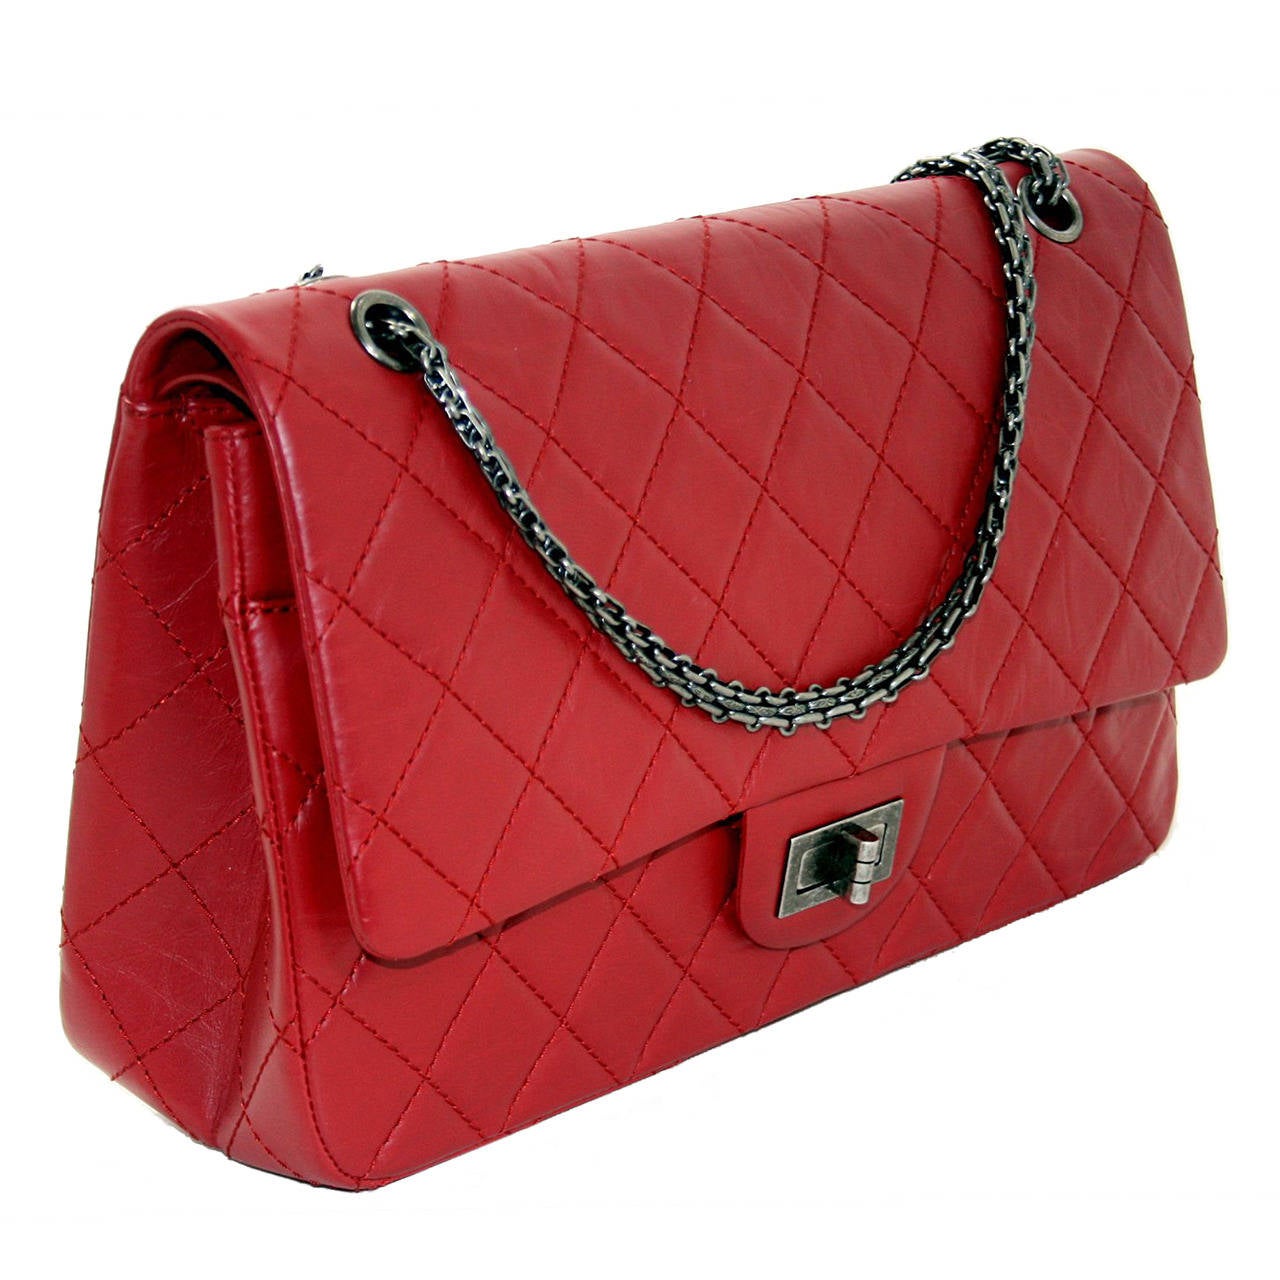 Chanel Red Leather 2.55 Reissue Double Flap Bag